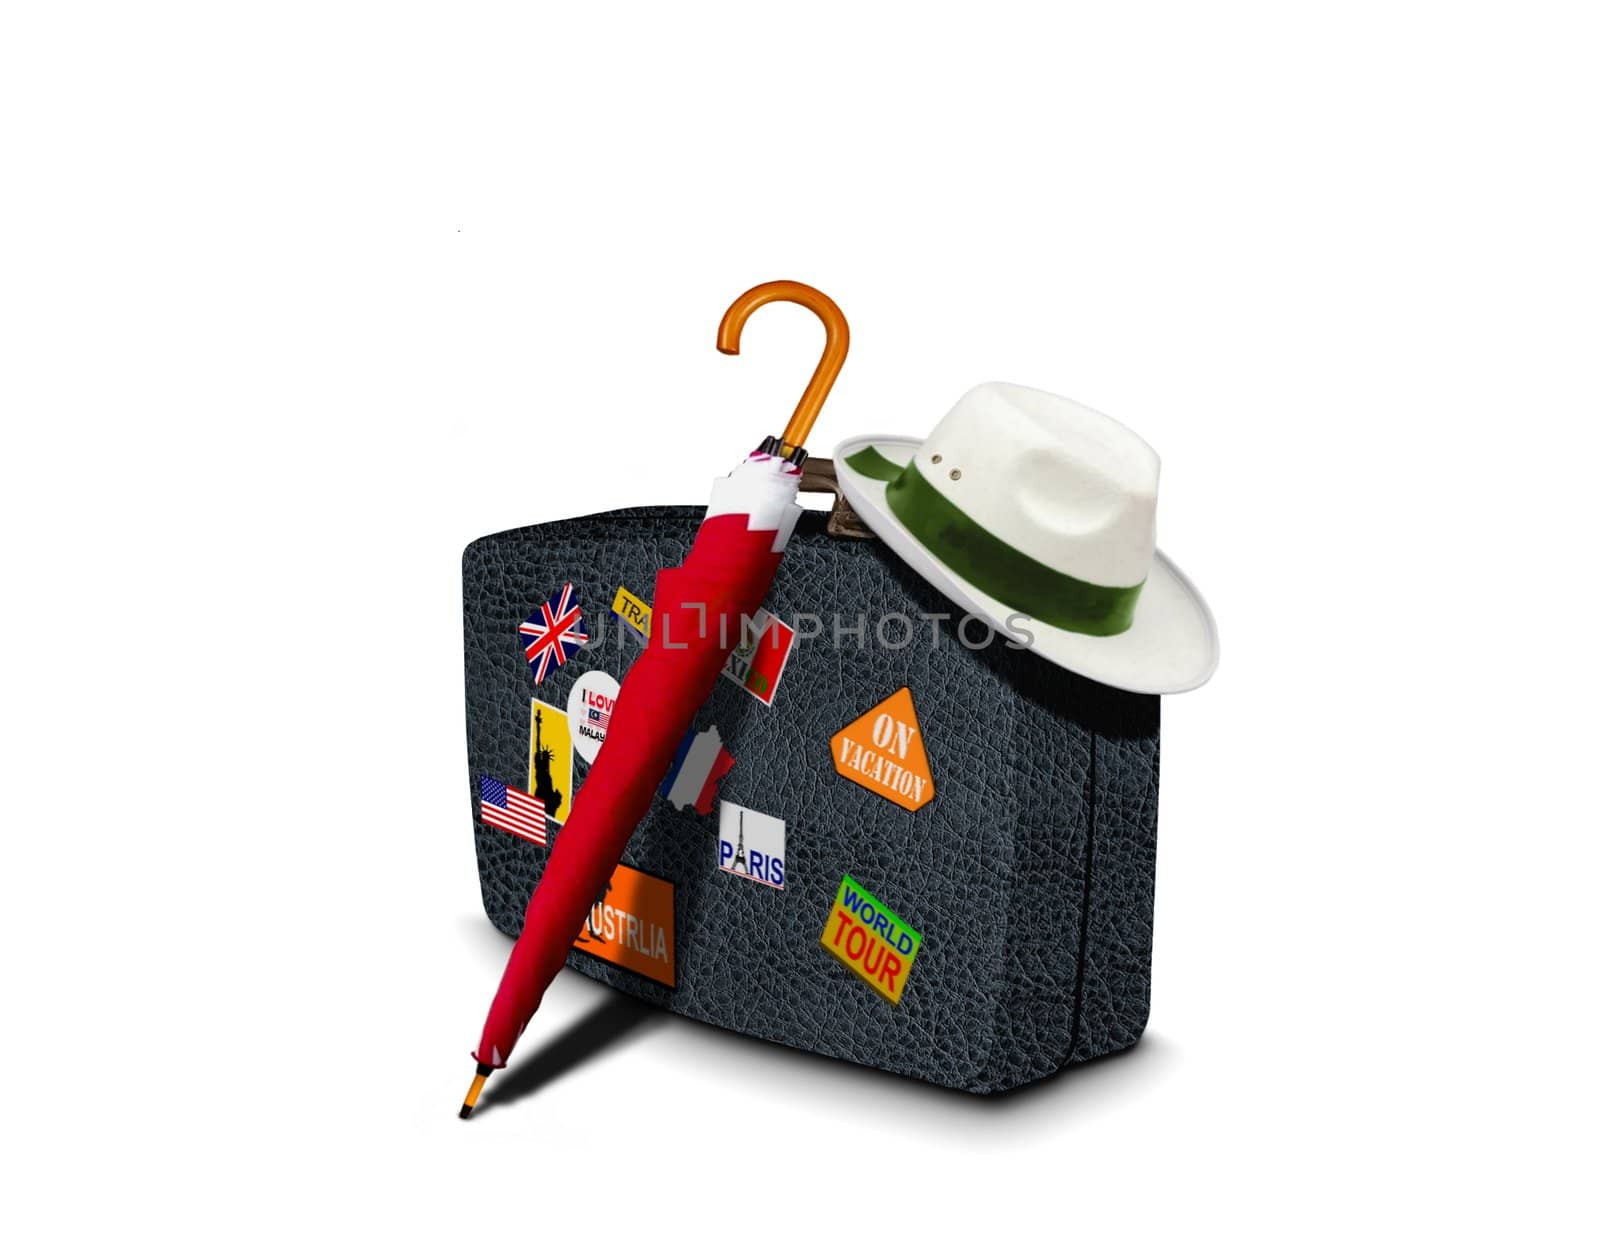 Black leather suitcase with umbrella and hat